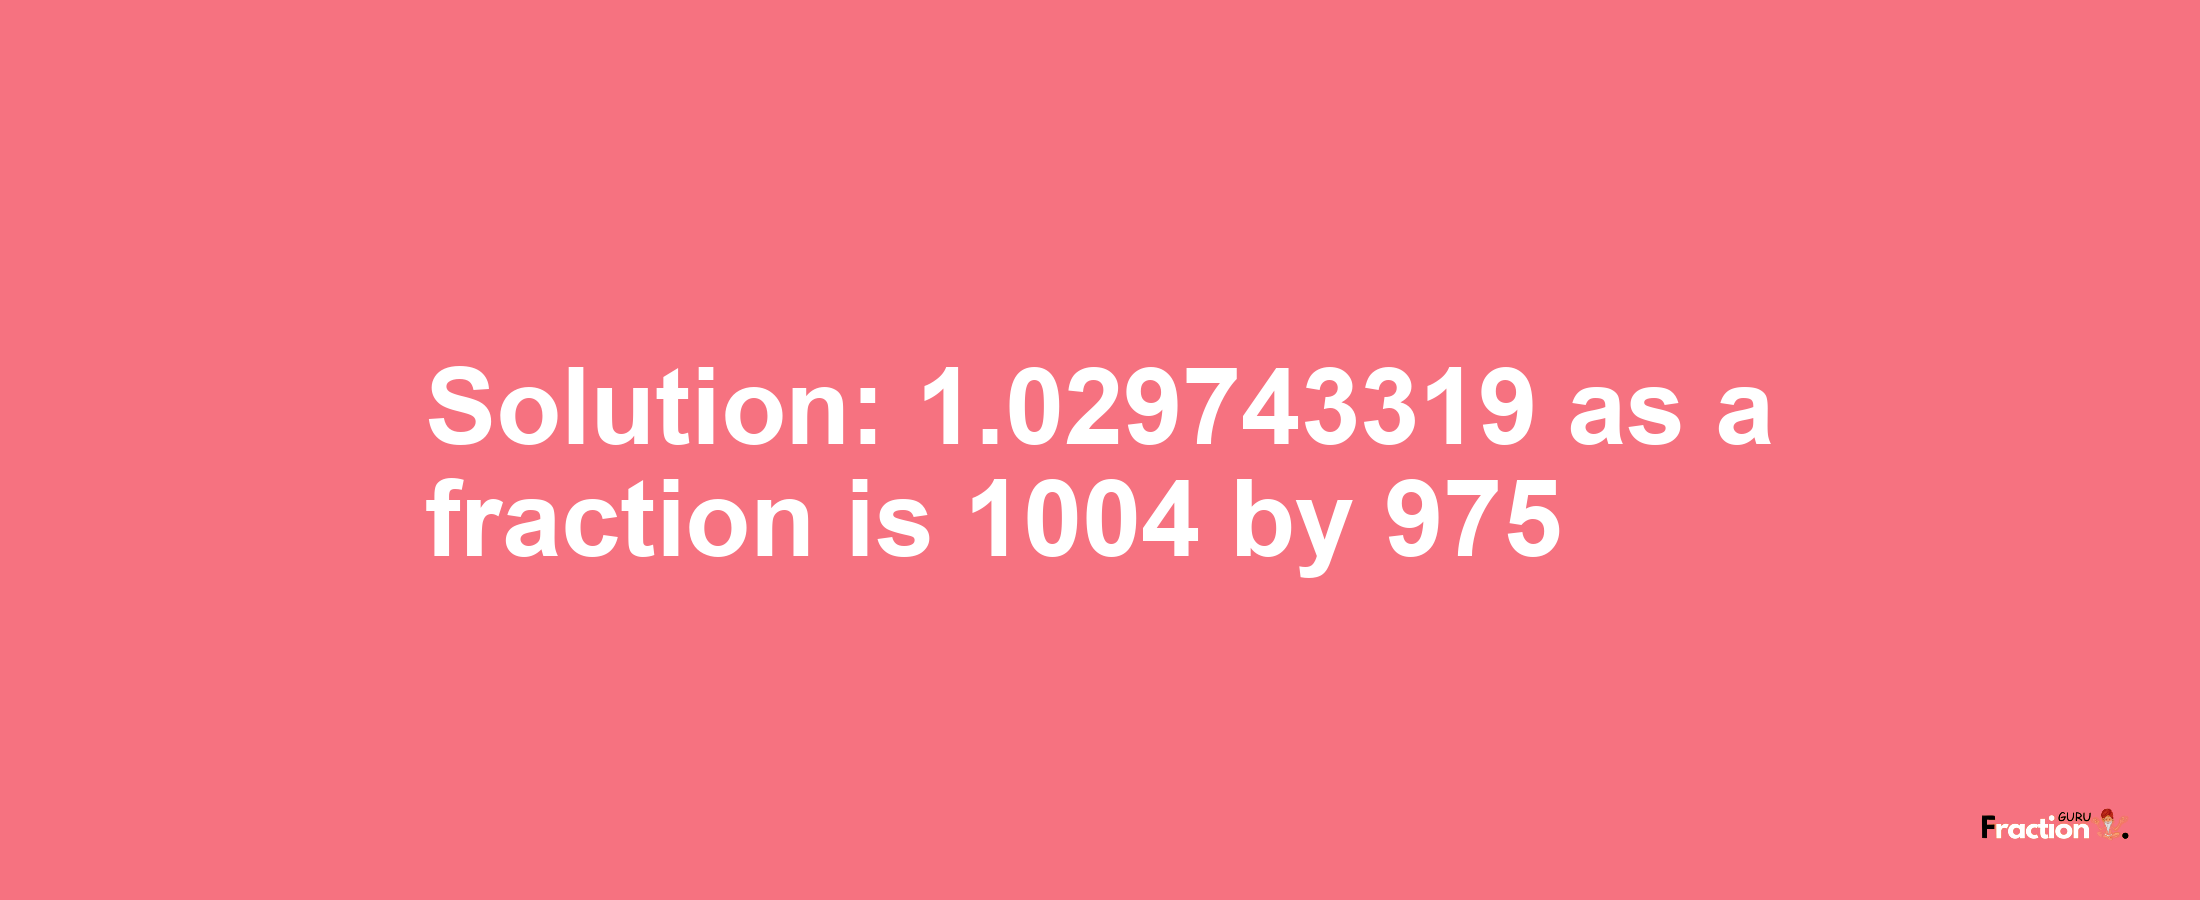 Solution:1.029743319 as a fraction is 1004/975